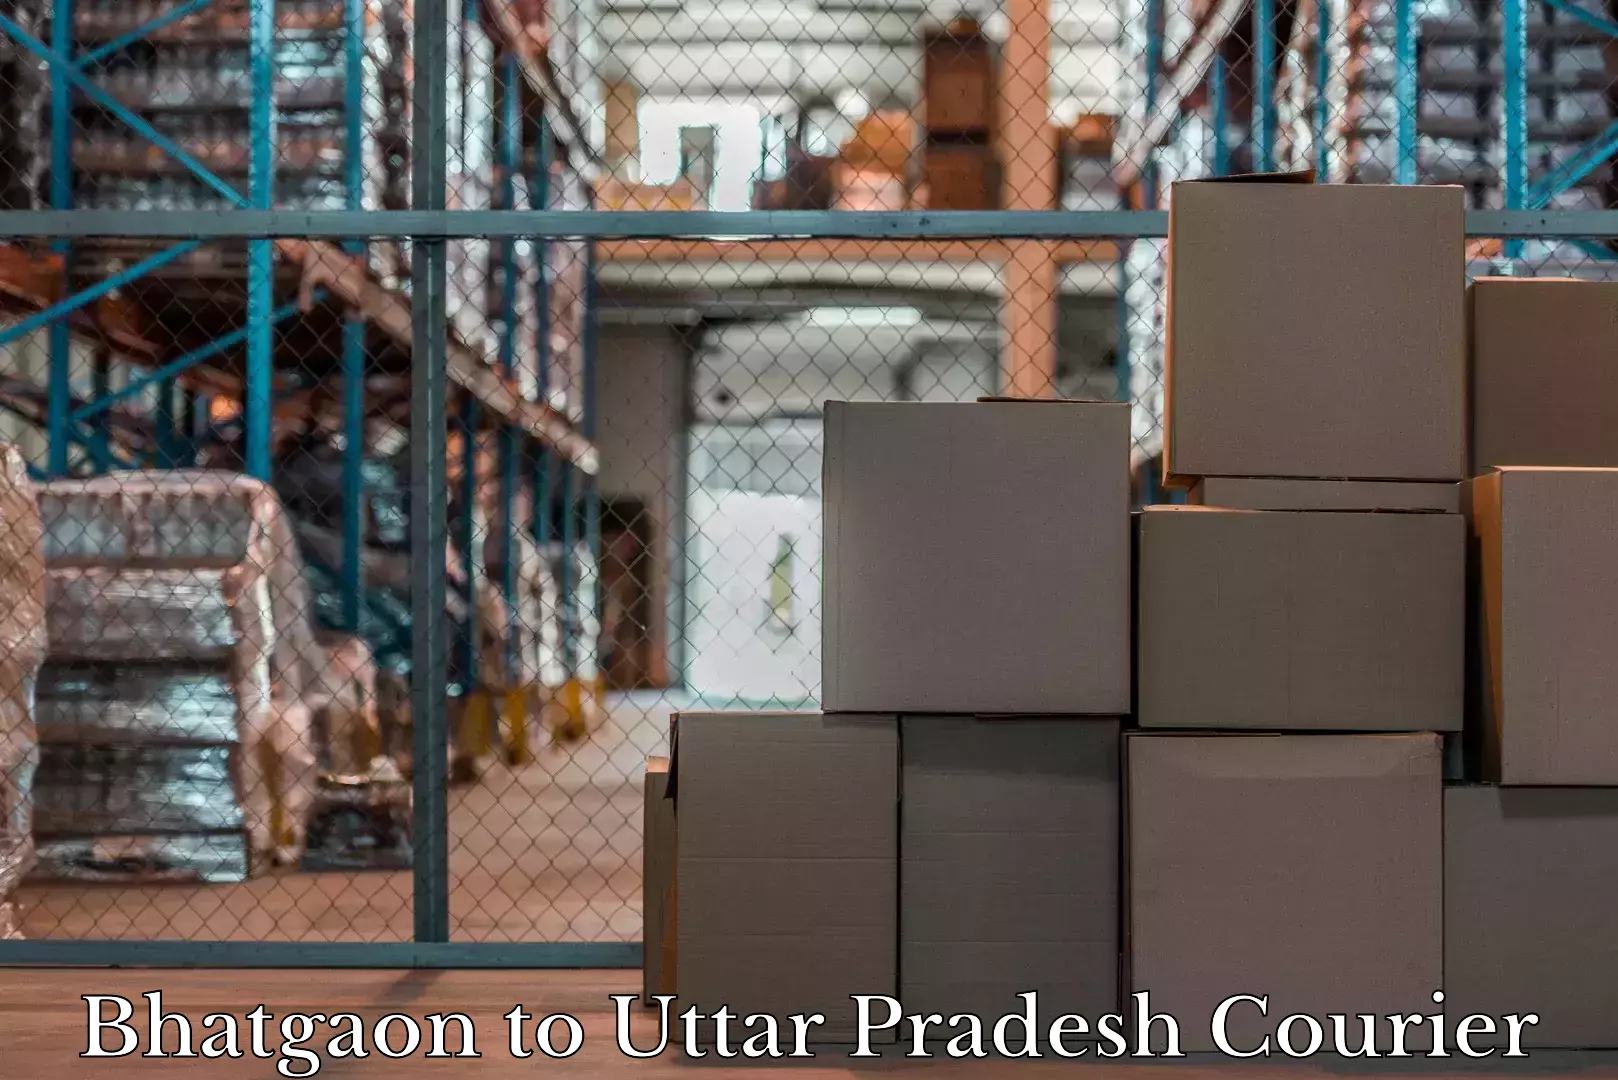 Baggage transport estimate Bhatgaon to Sultanpur Avadh